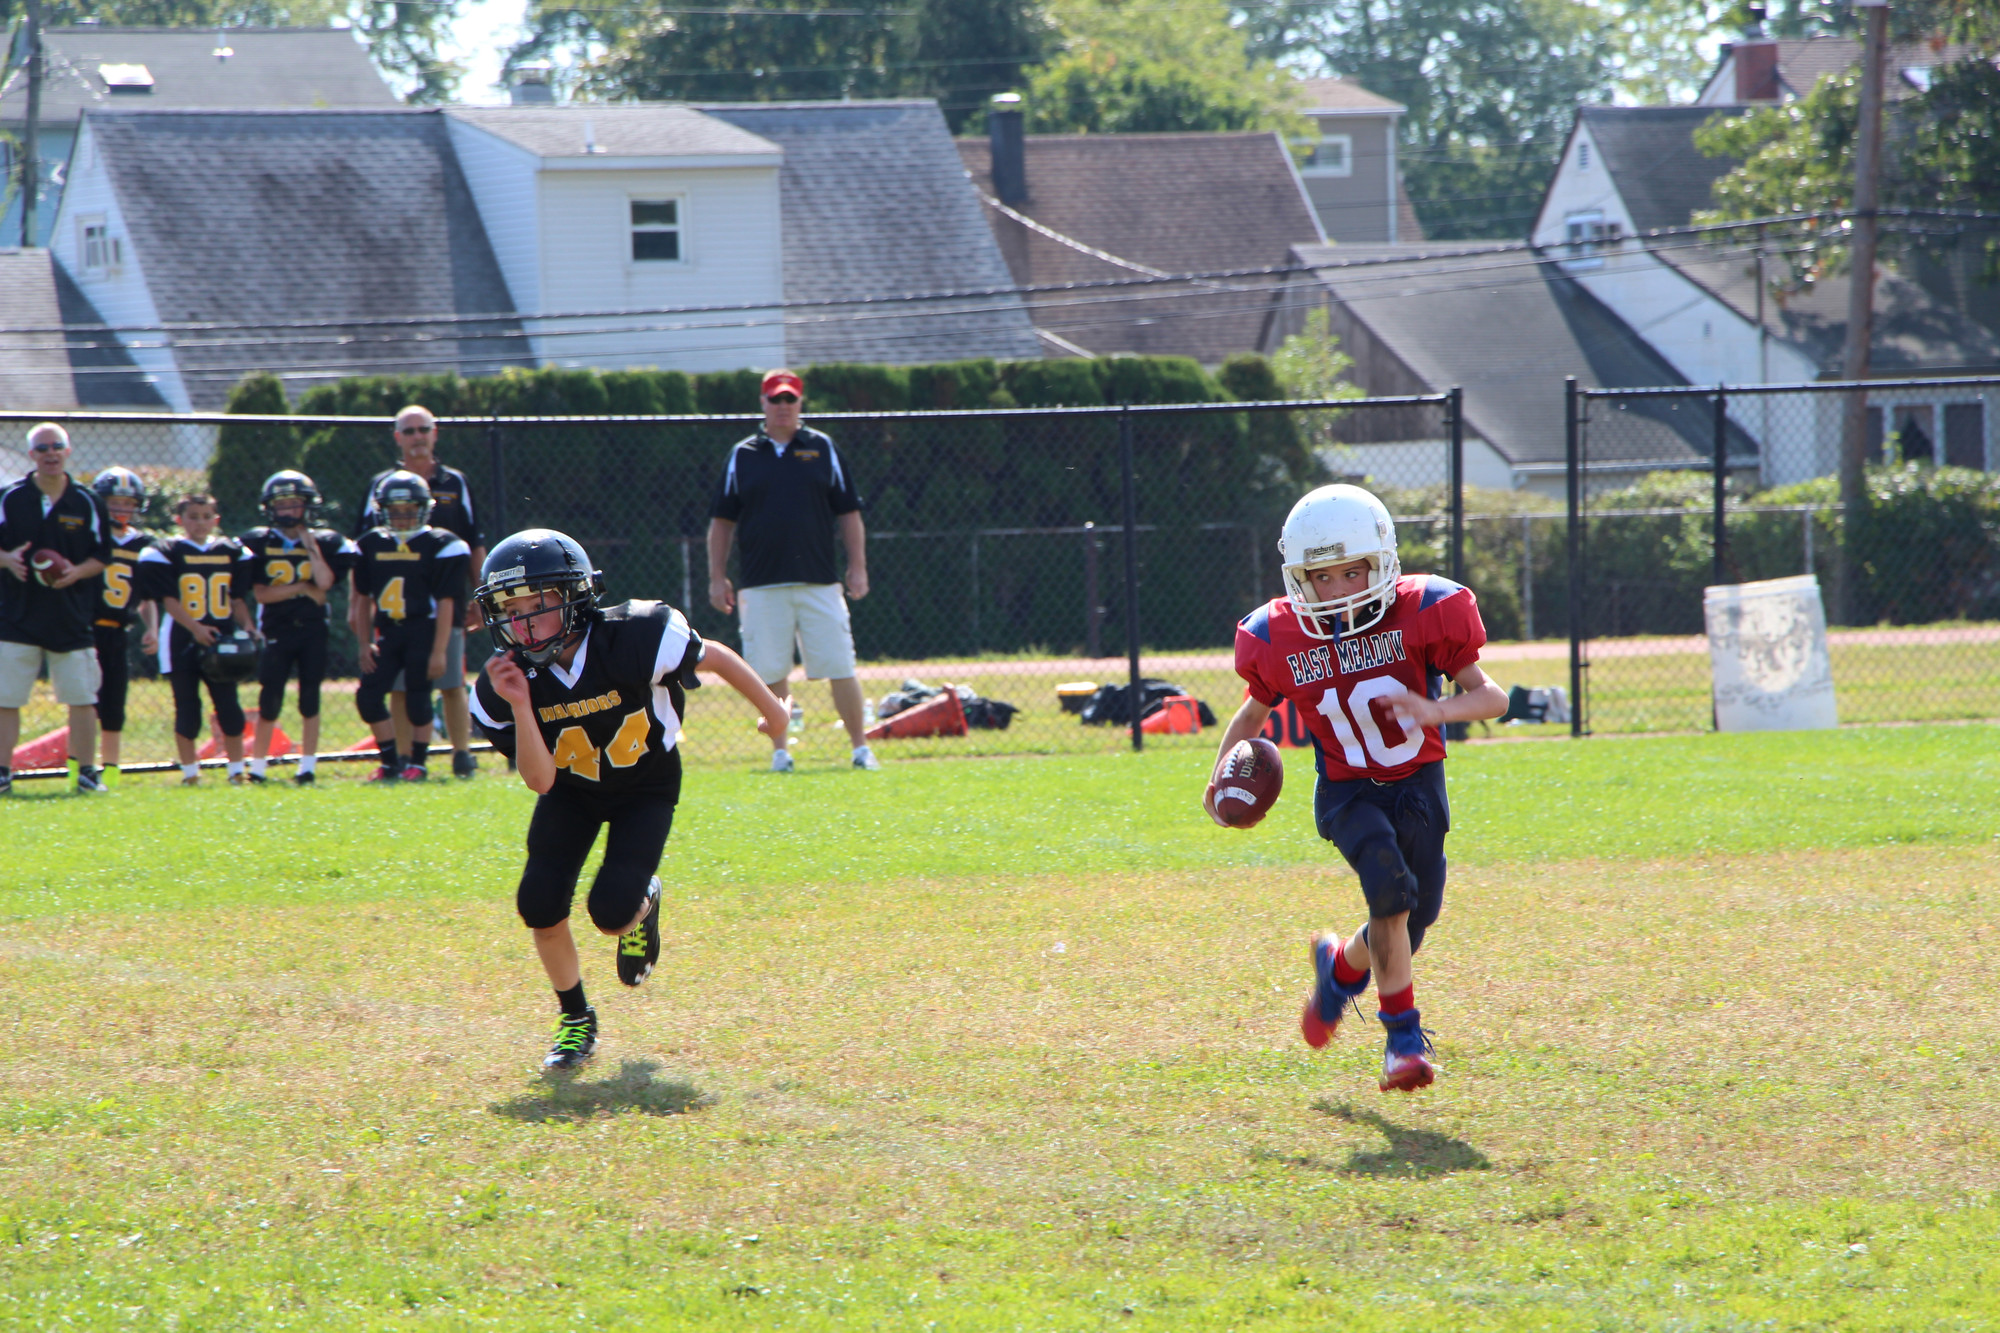 local football players of all ages took the field to play games throughout the day.